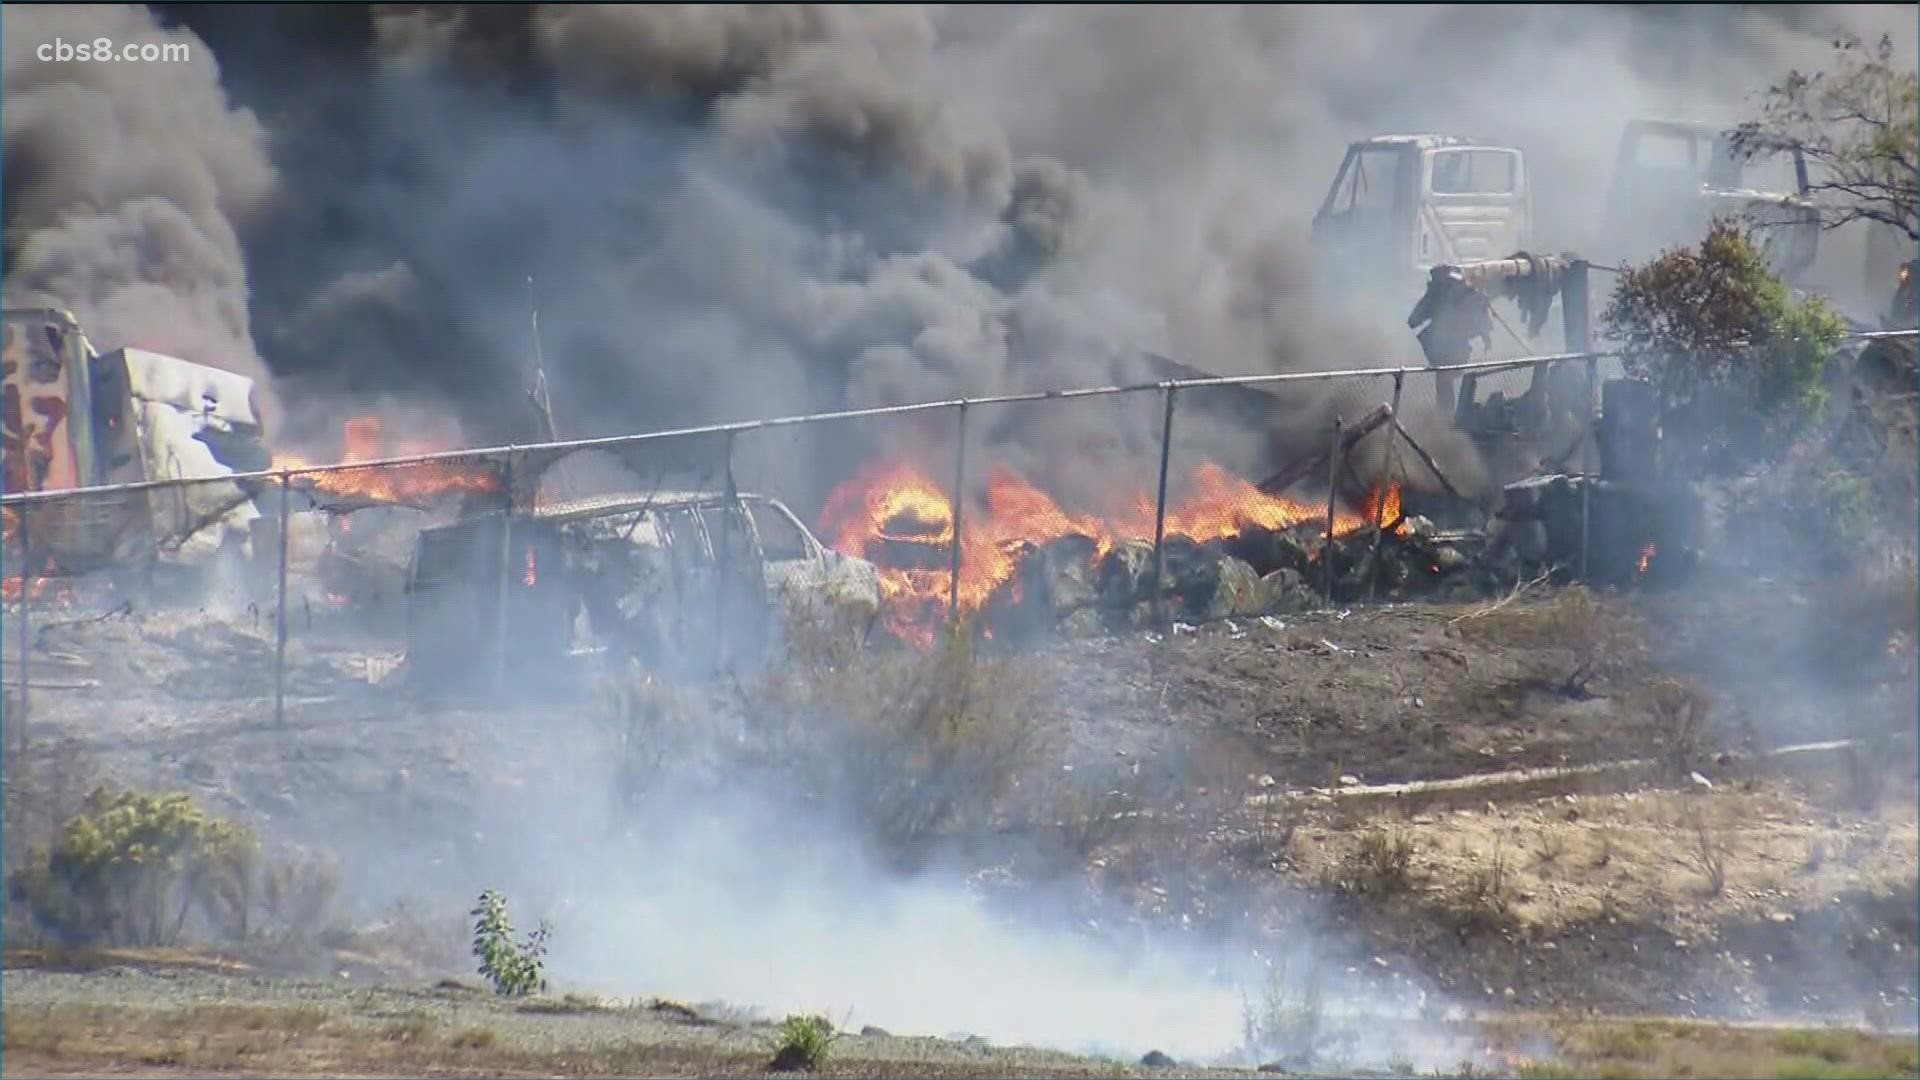 Twenty people were evacuated Saturday near a large fire that destroyed an estimated 200 vehicles at a wrecking yard.